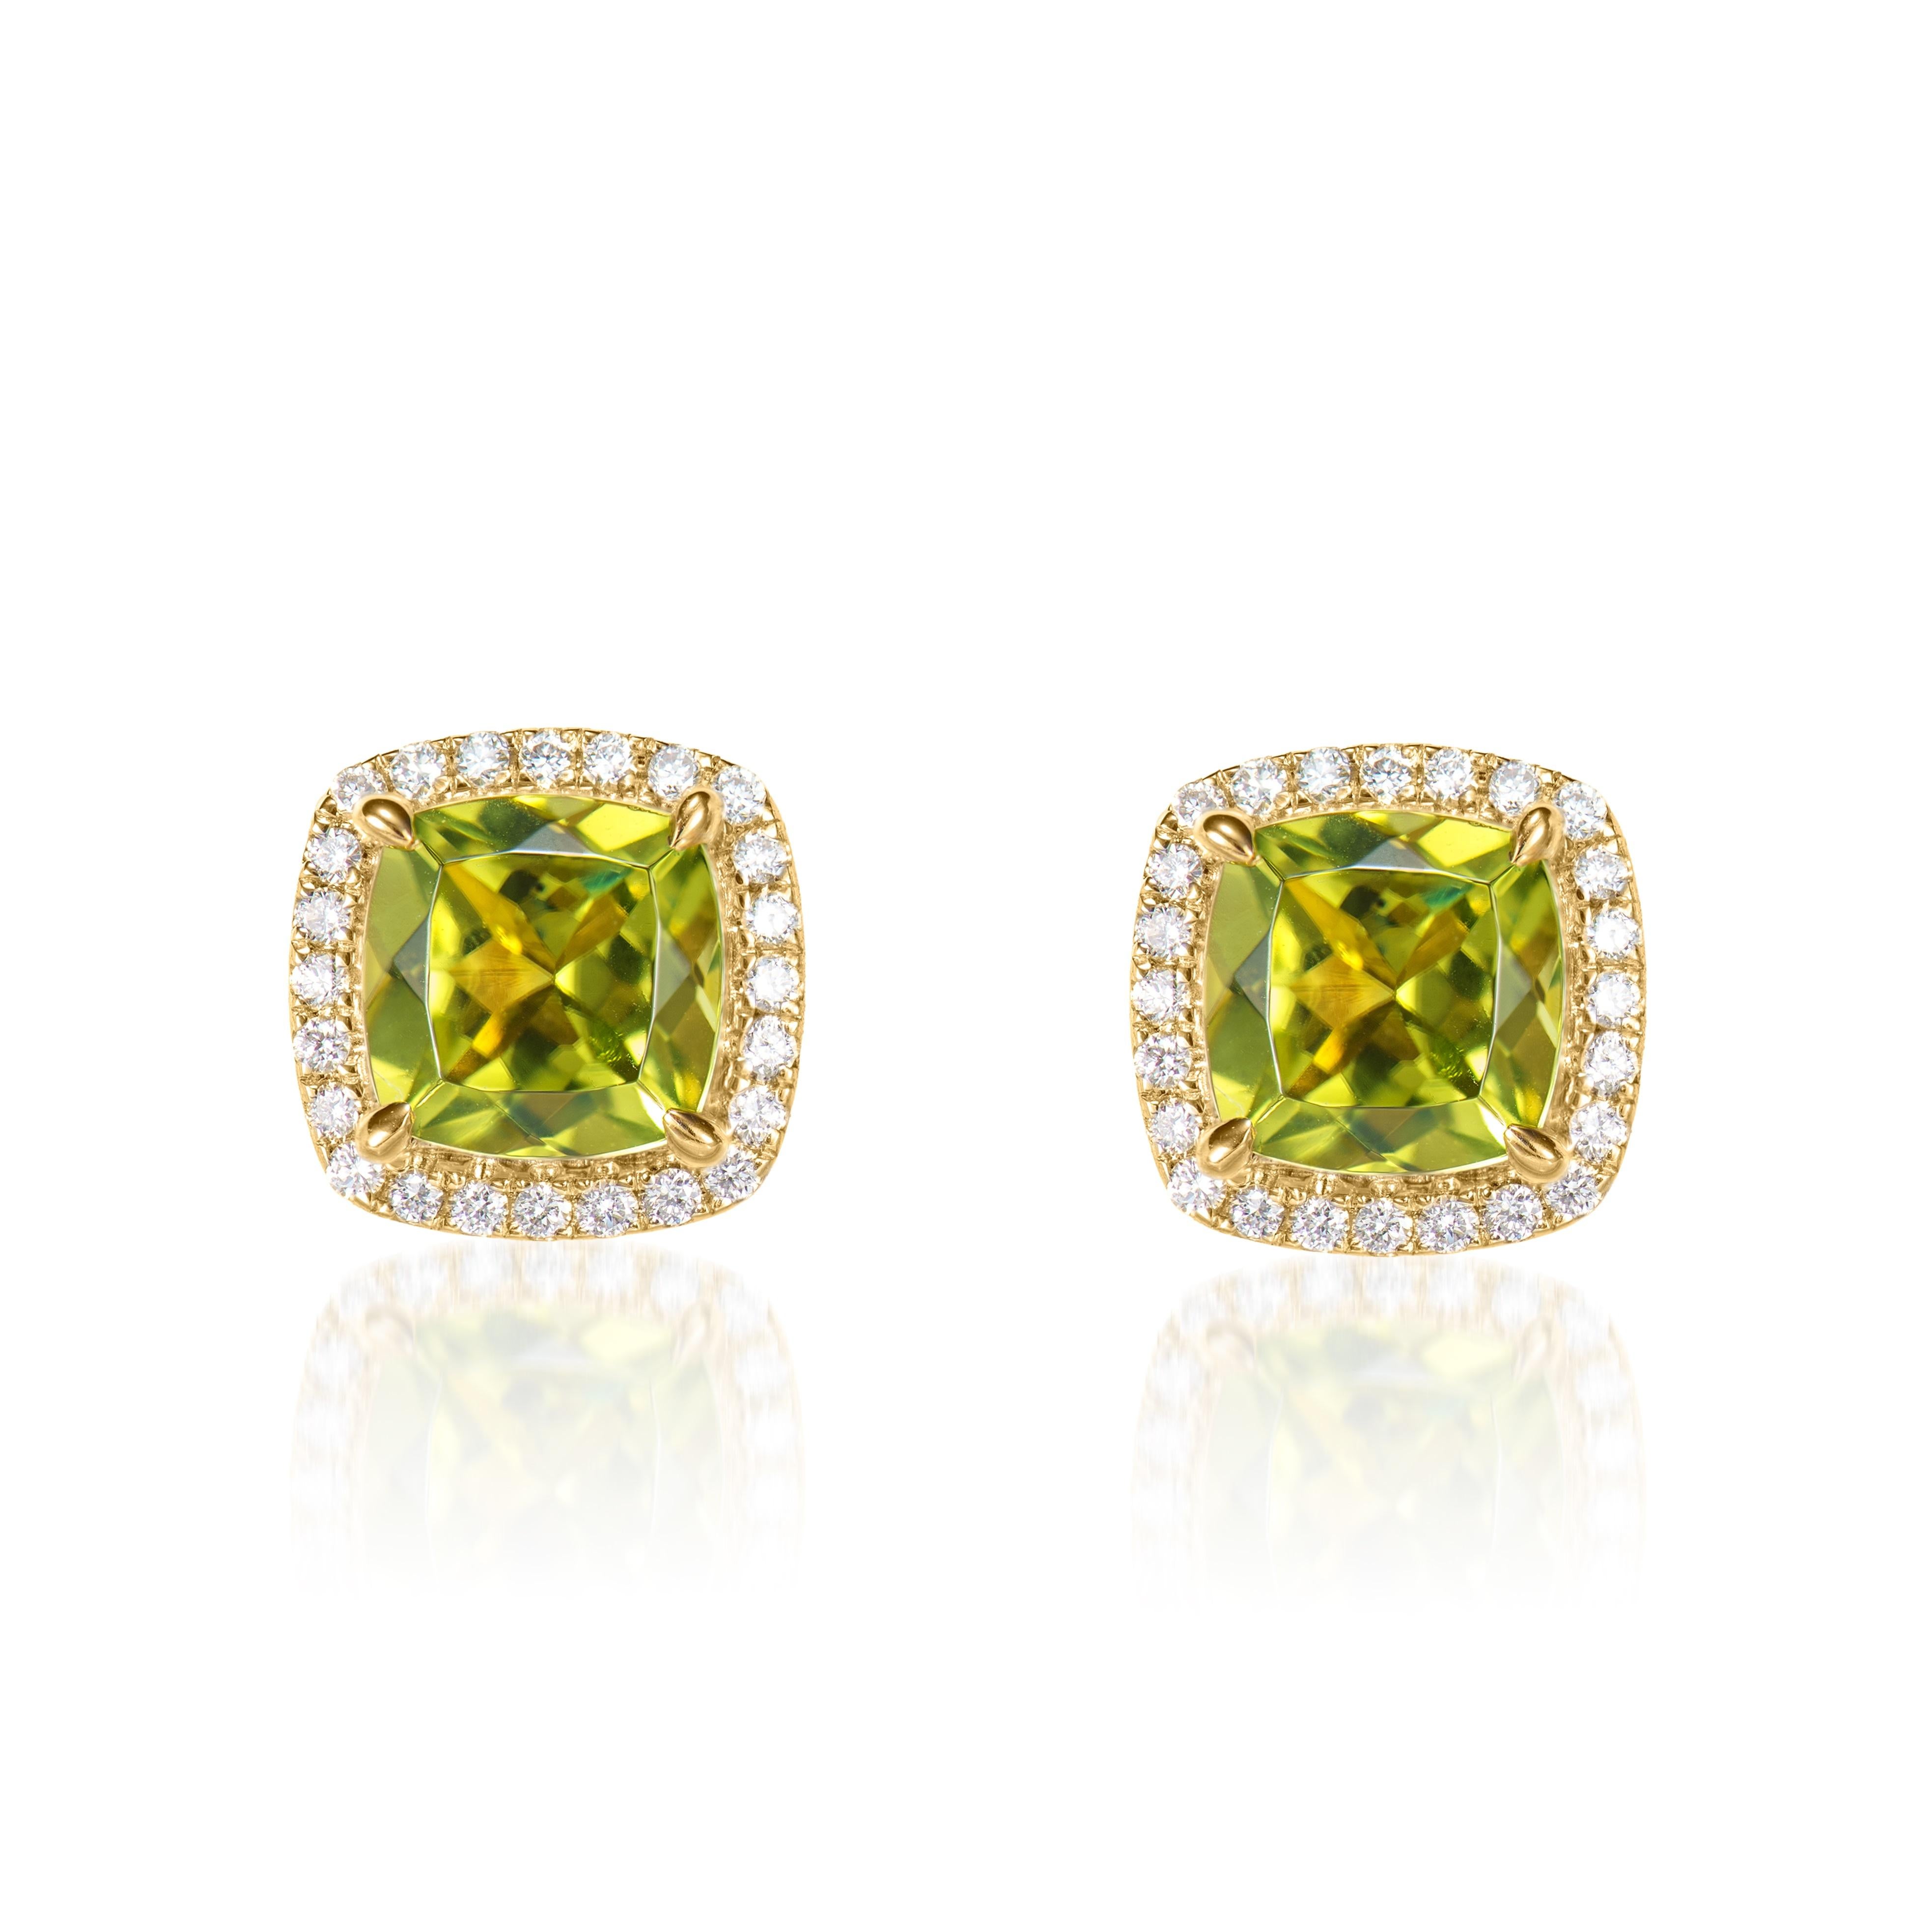 Contemporary 2.13 carat Peridot stud Earrings in 18Karat Yellow Gold with White Diamond. For Sale